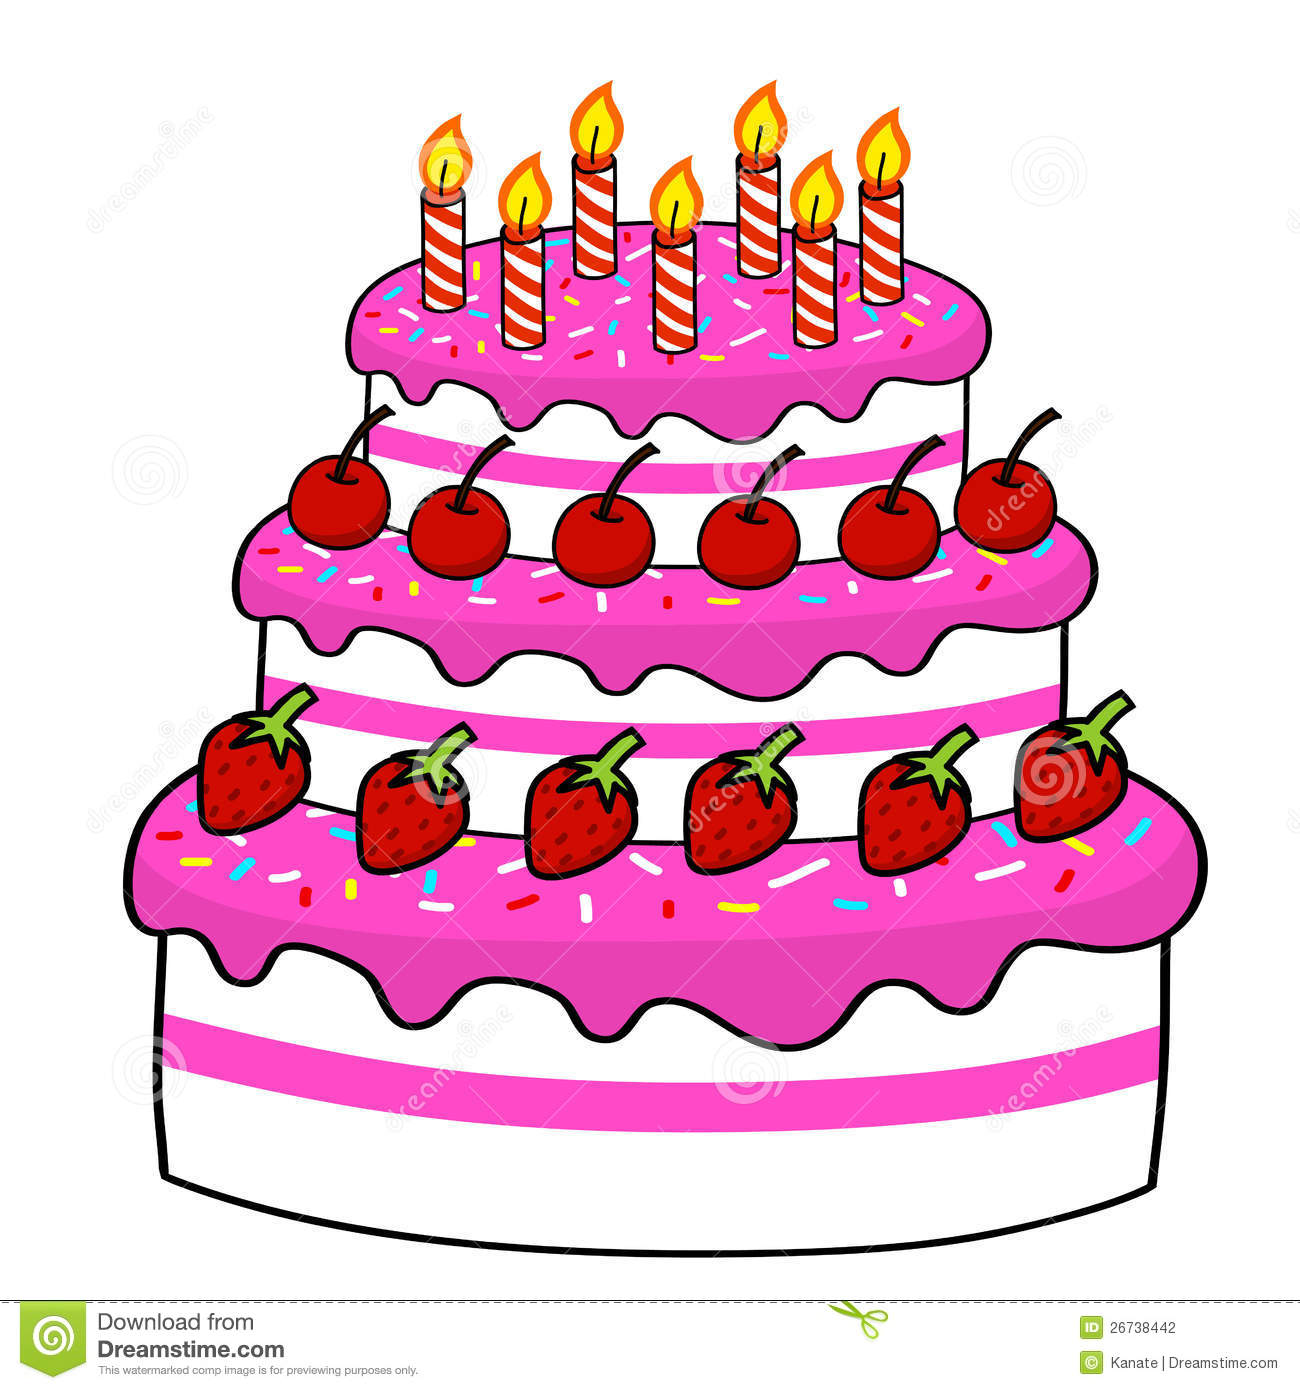 Free Cartoon Cakes, Download Free Cartoon Cakes png images, Free